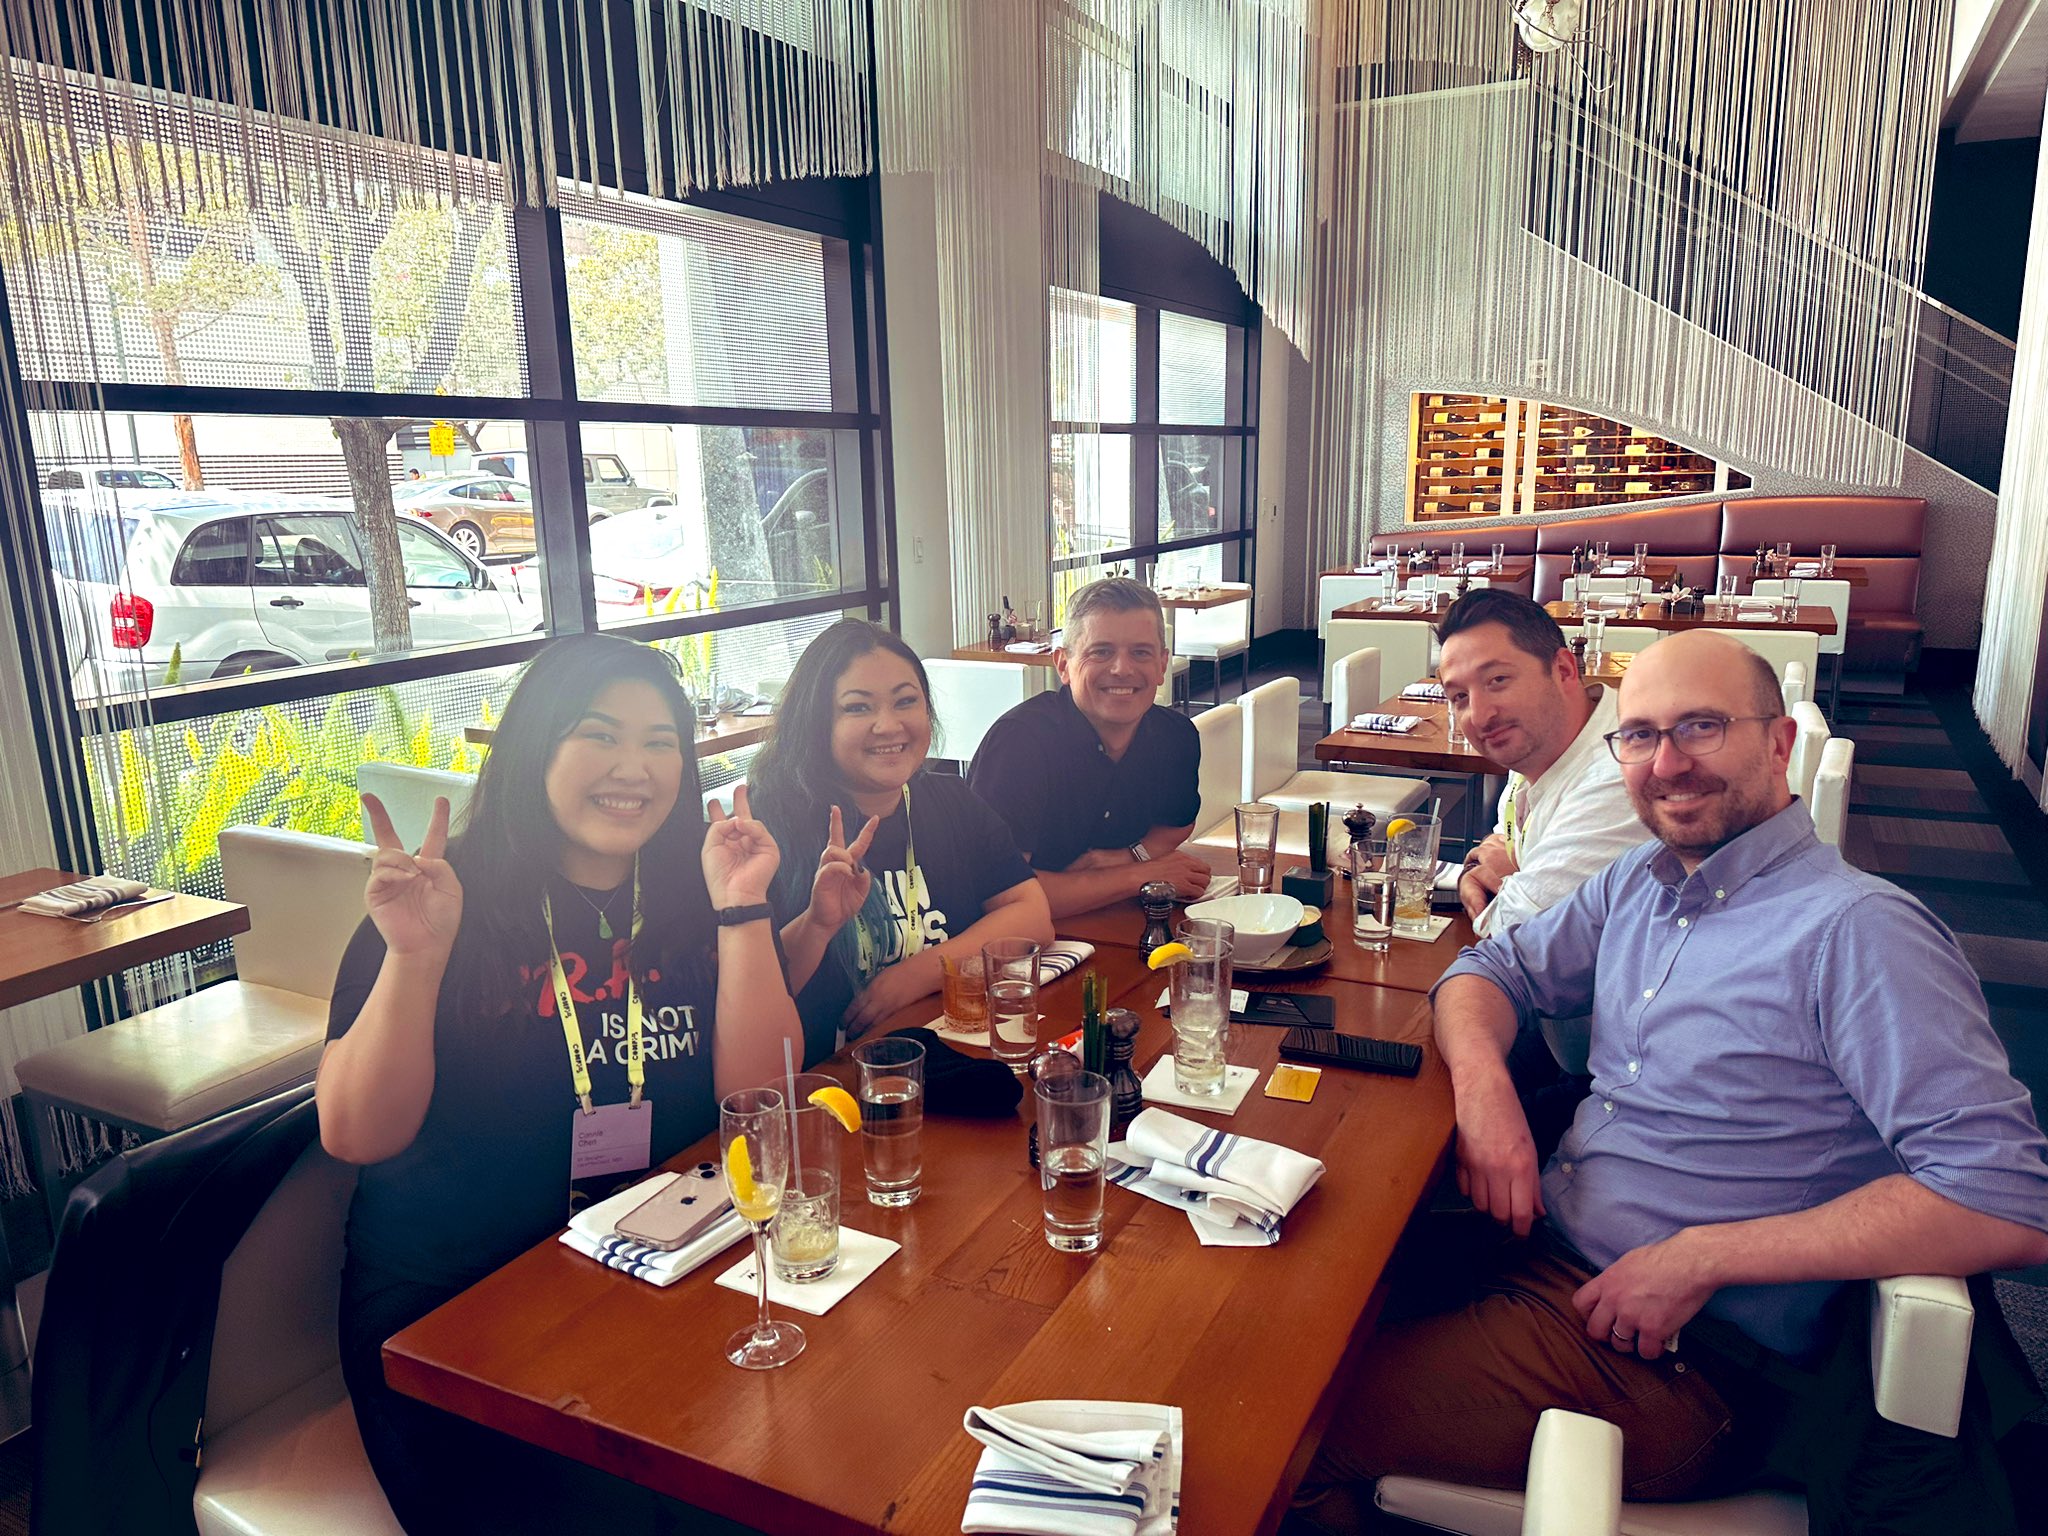 Myself sitting with Jina, Nathan Curtis, Kaelig Deloumeau-Prigent, and Connie Chen. Lunchtime at Config 2023